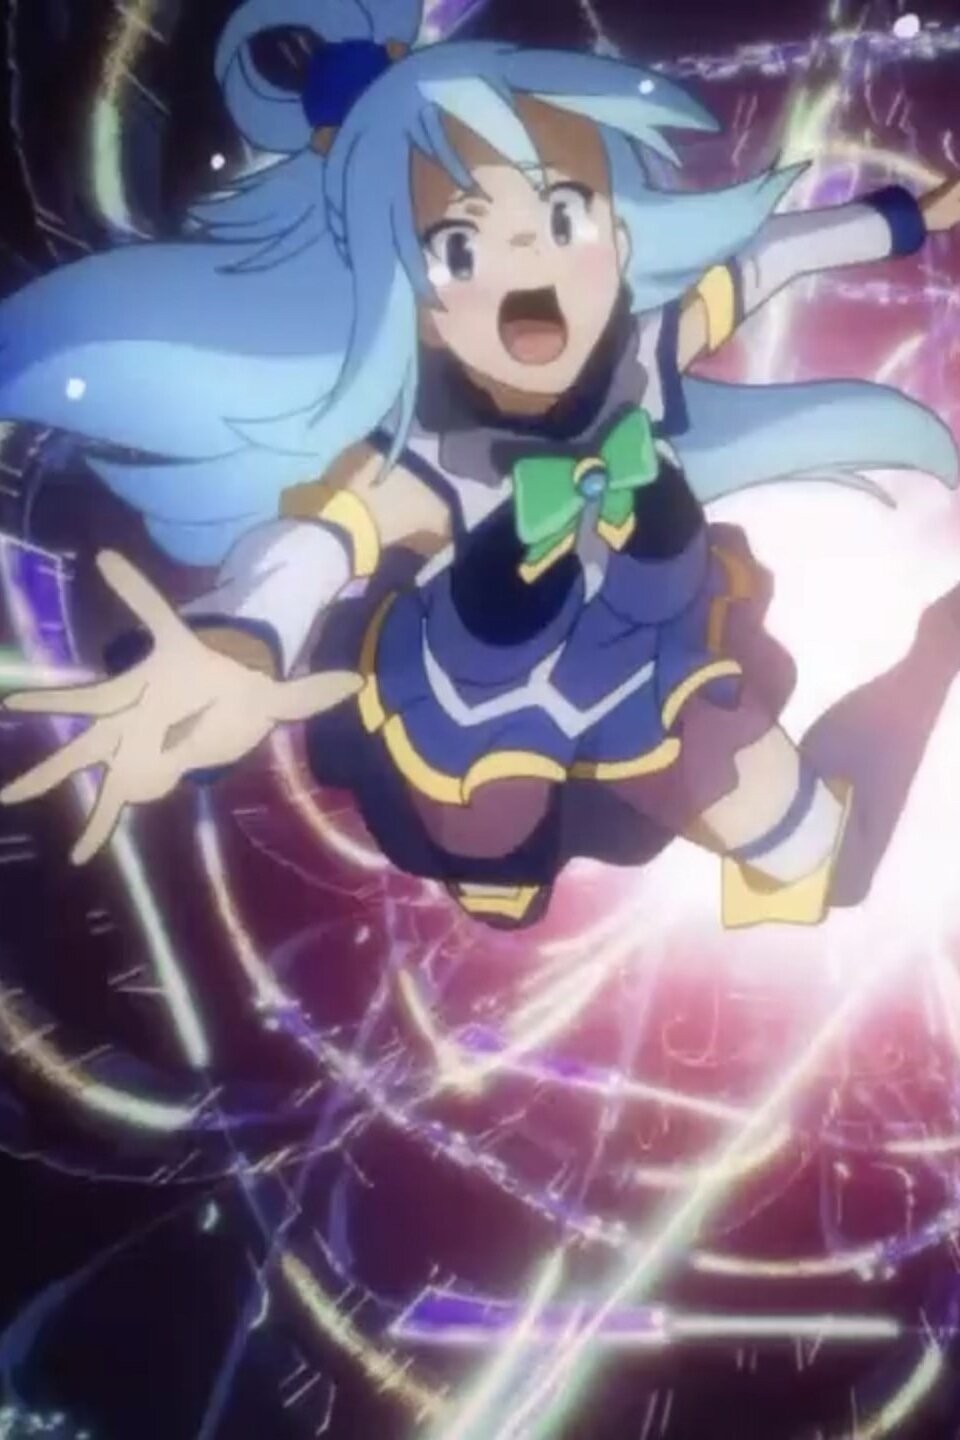 Watch KonoSuba – God's blessing on this wonderful world! Episode 1 Online -  This Self-Proclaimed Goddess and Reincarnation in Another World!